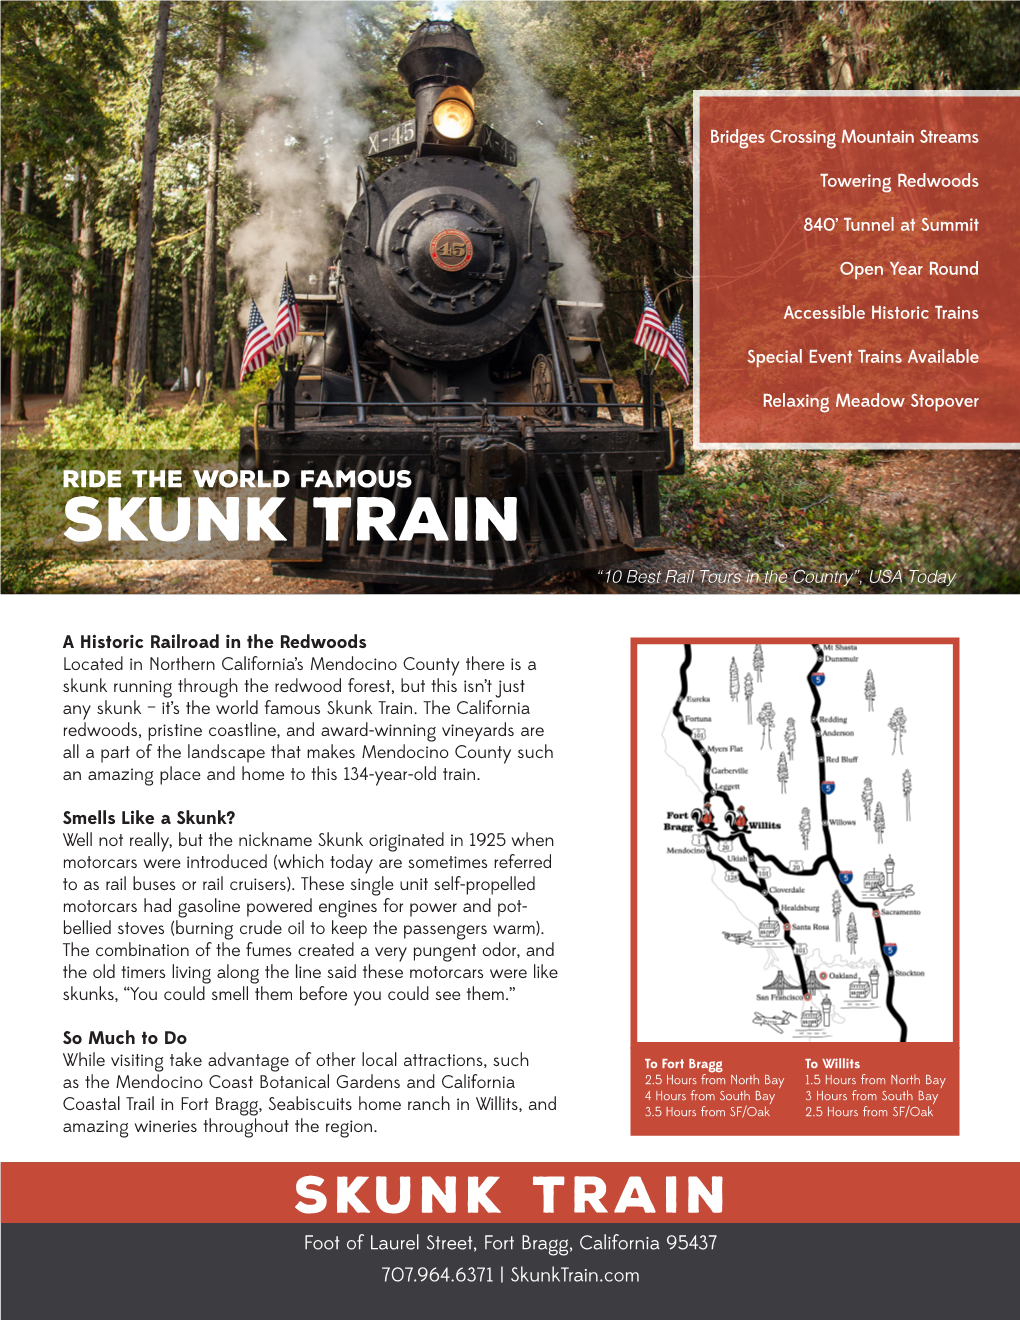 Skunk Train “10 Best Rail Tours in the Country”, USA Today